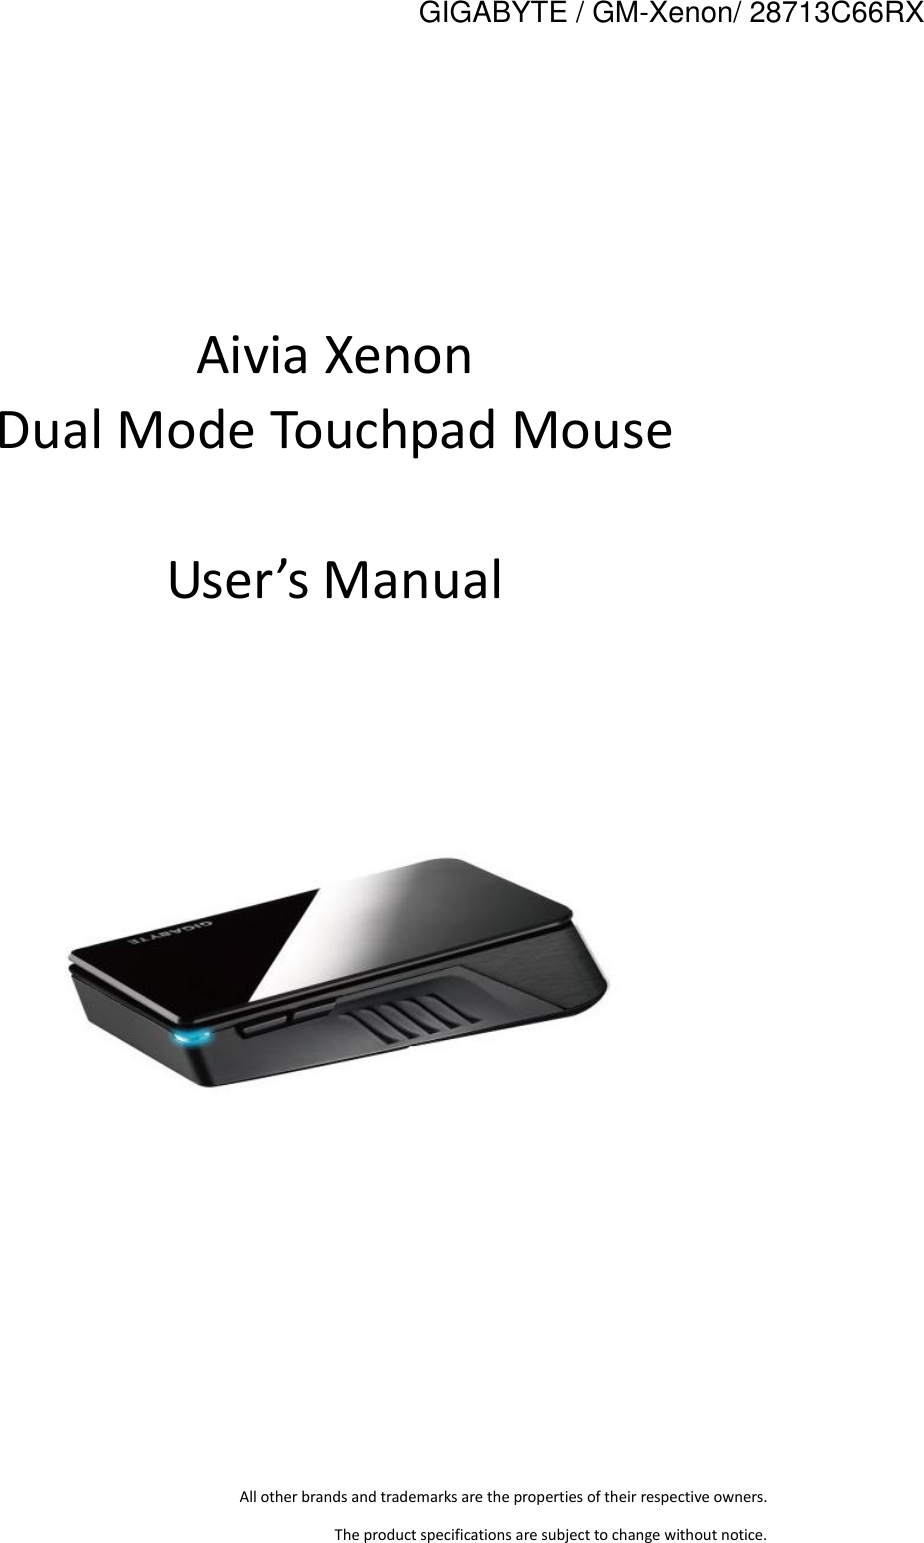      Aivia Xenon Dual Mode Touchpad Mouse  User’s Manual                All other brands and trademarks are the properties of their respective owners. The product specifications are subject to change without notice. GIGABYTE / GM-Xenon/ 28713C66RX